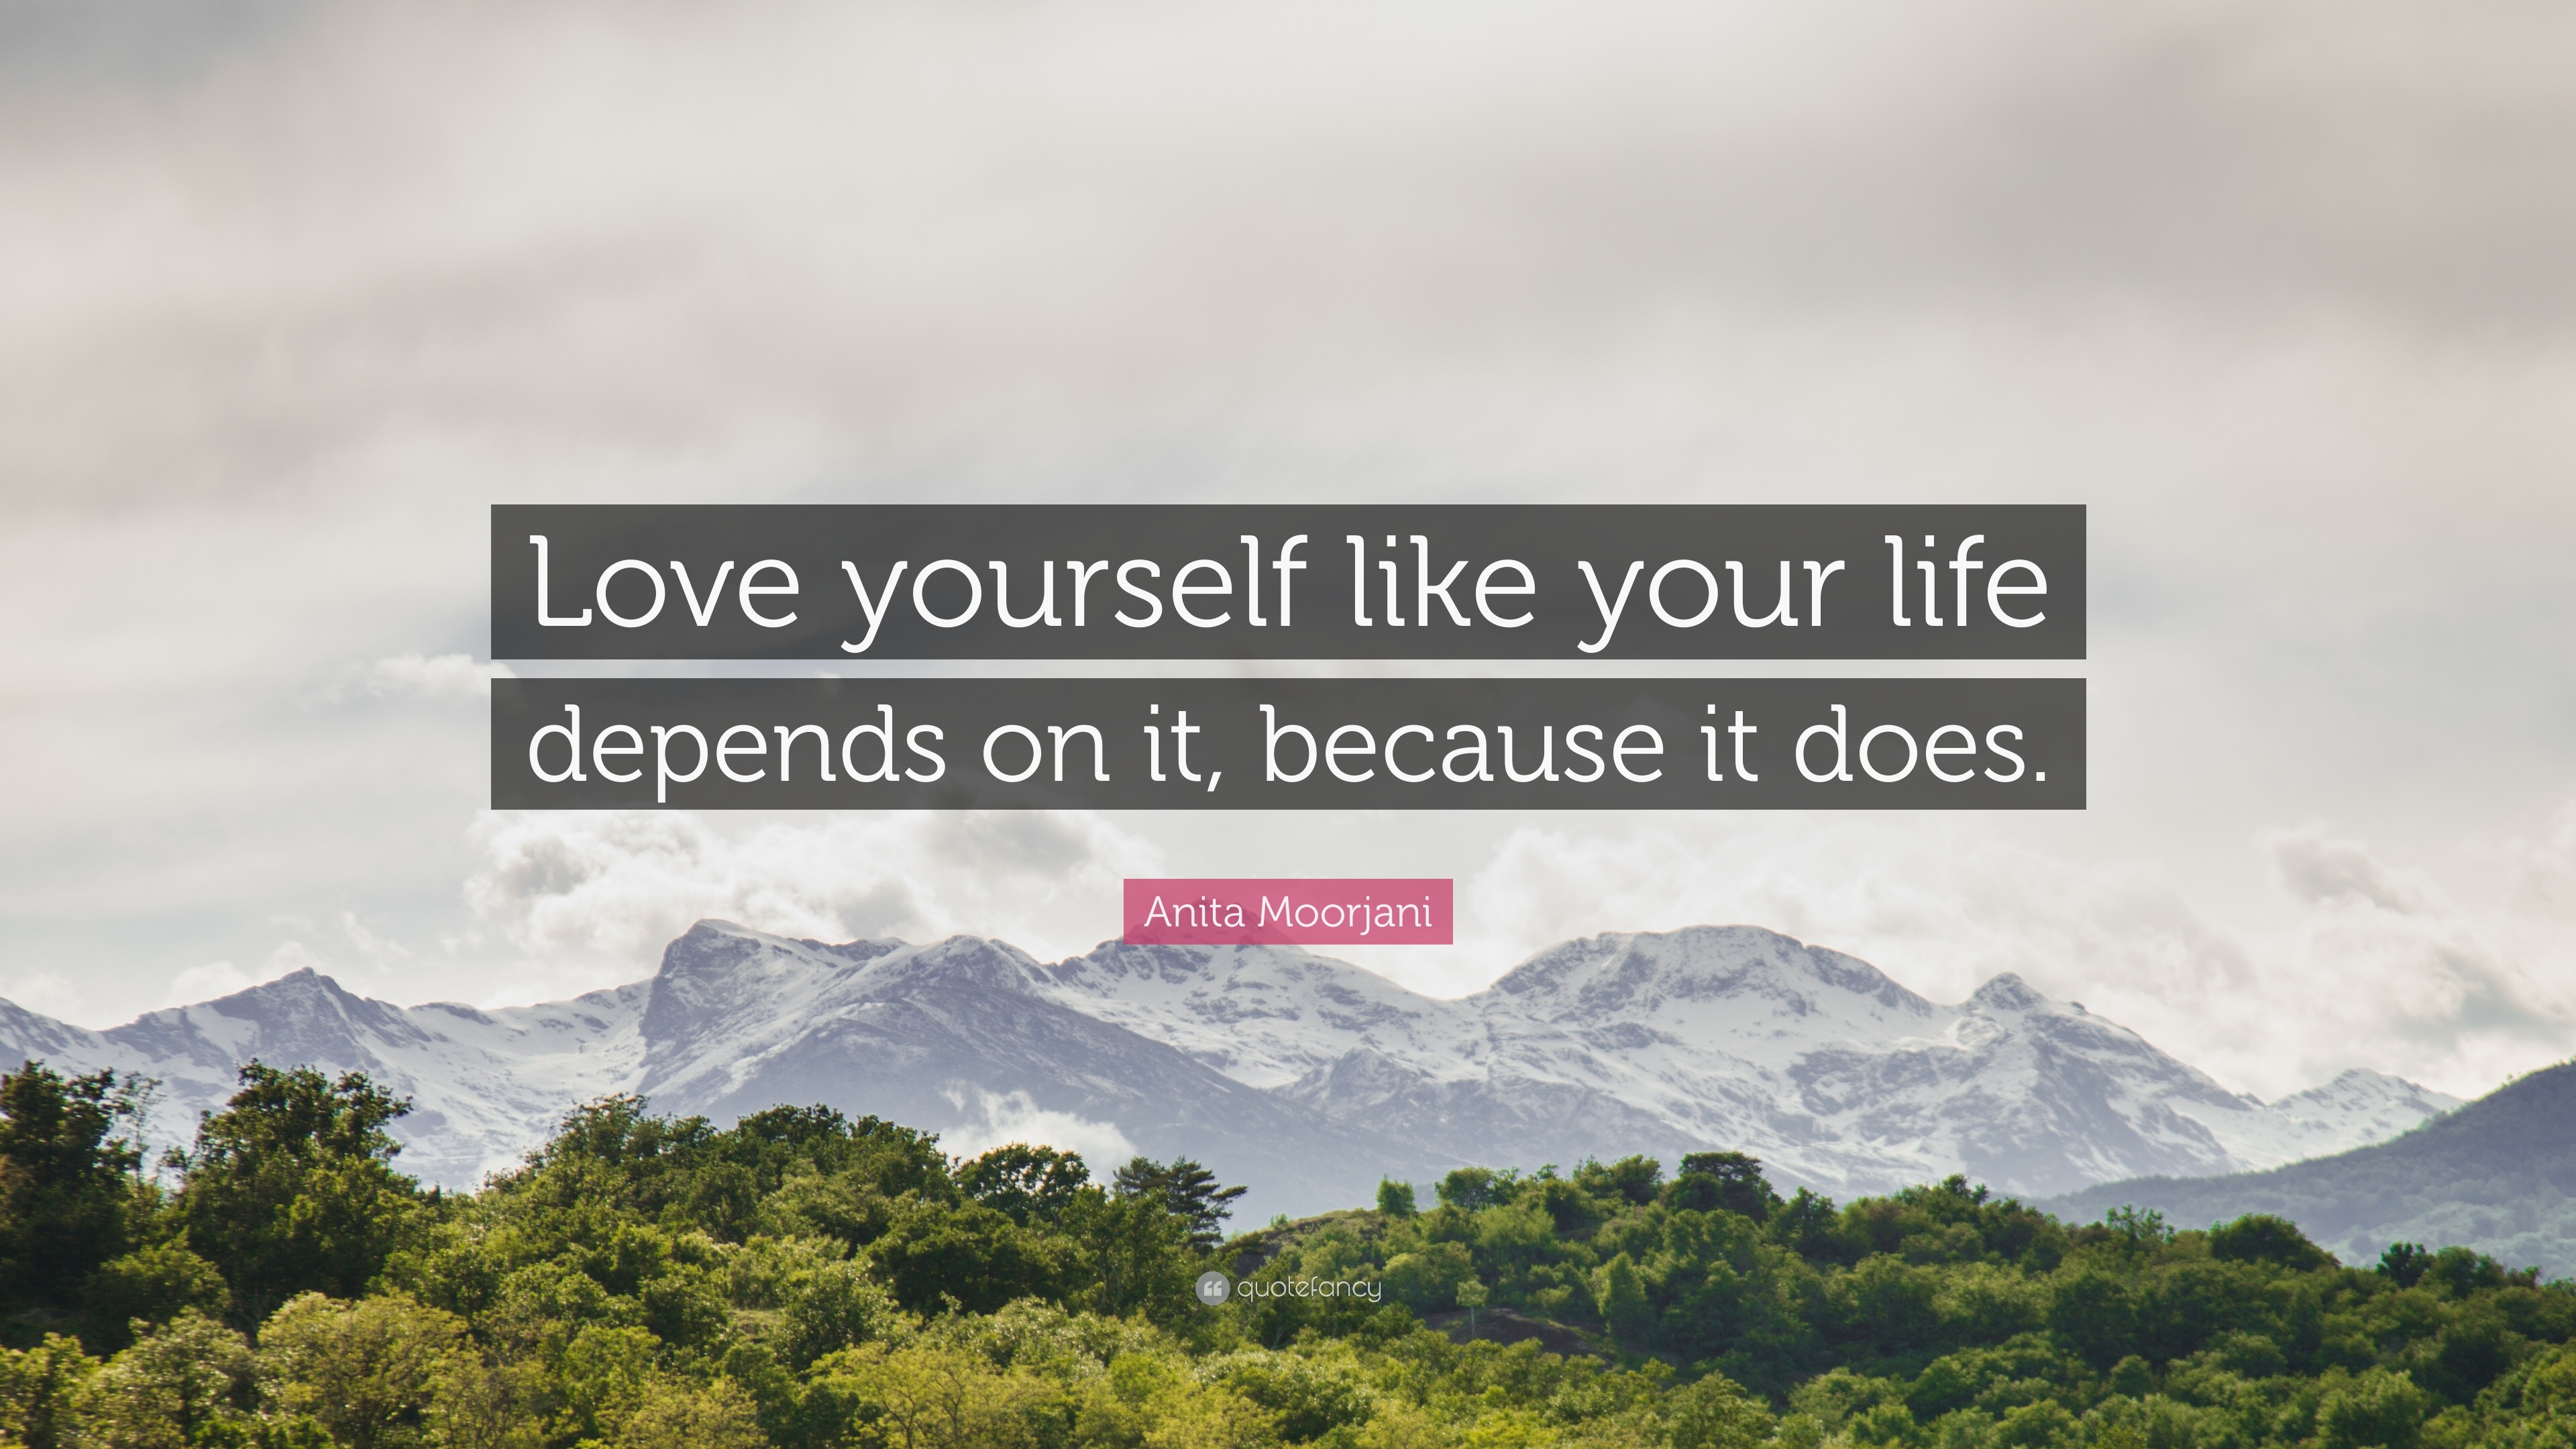 Anita Moorjani Quote Love Yourself Like Your Life Depends On It Because It